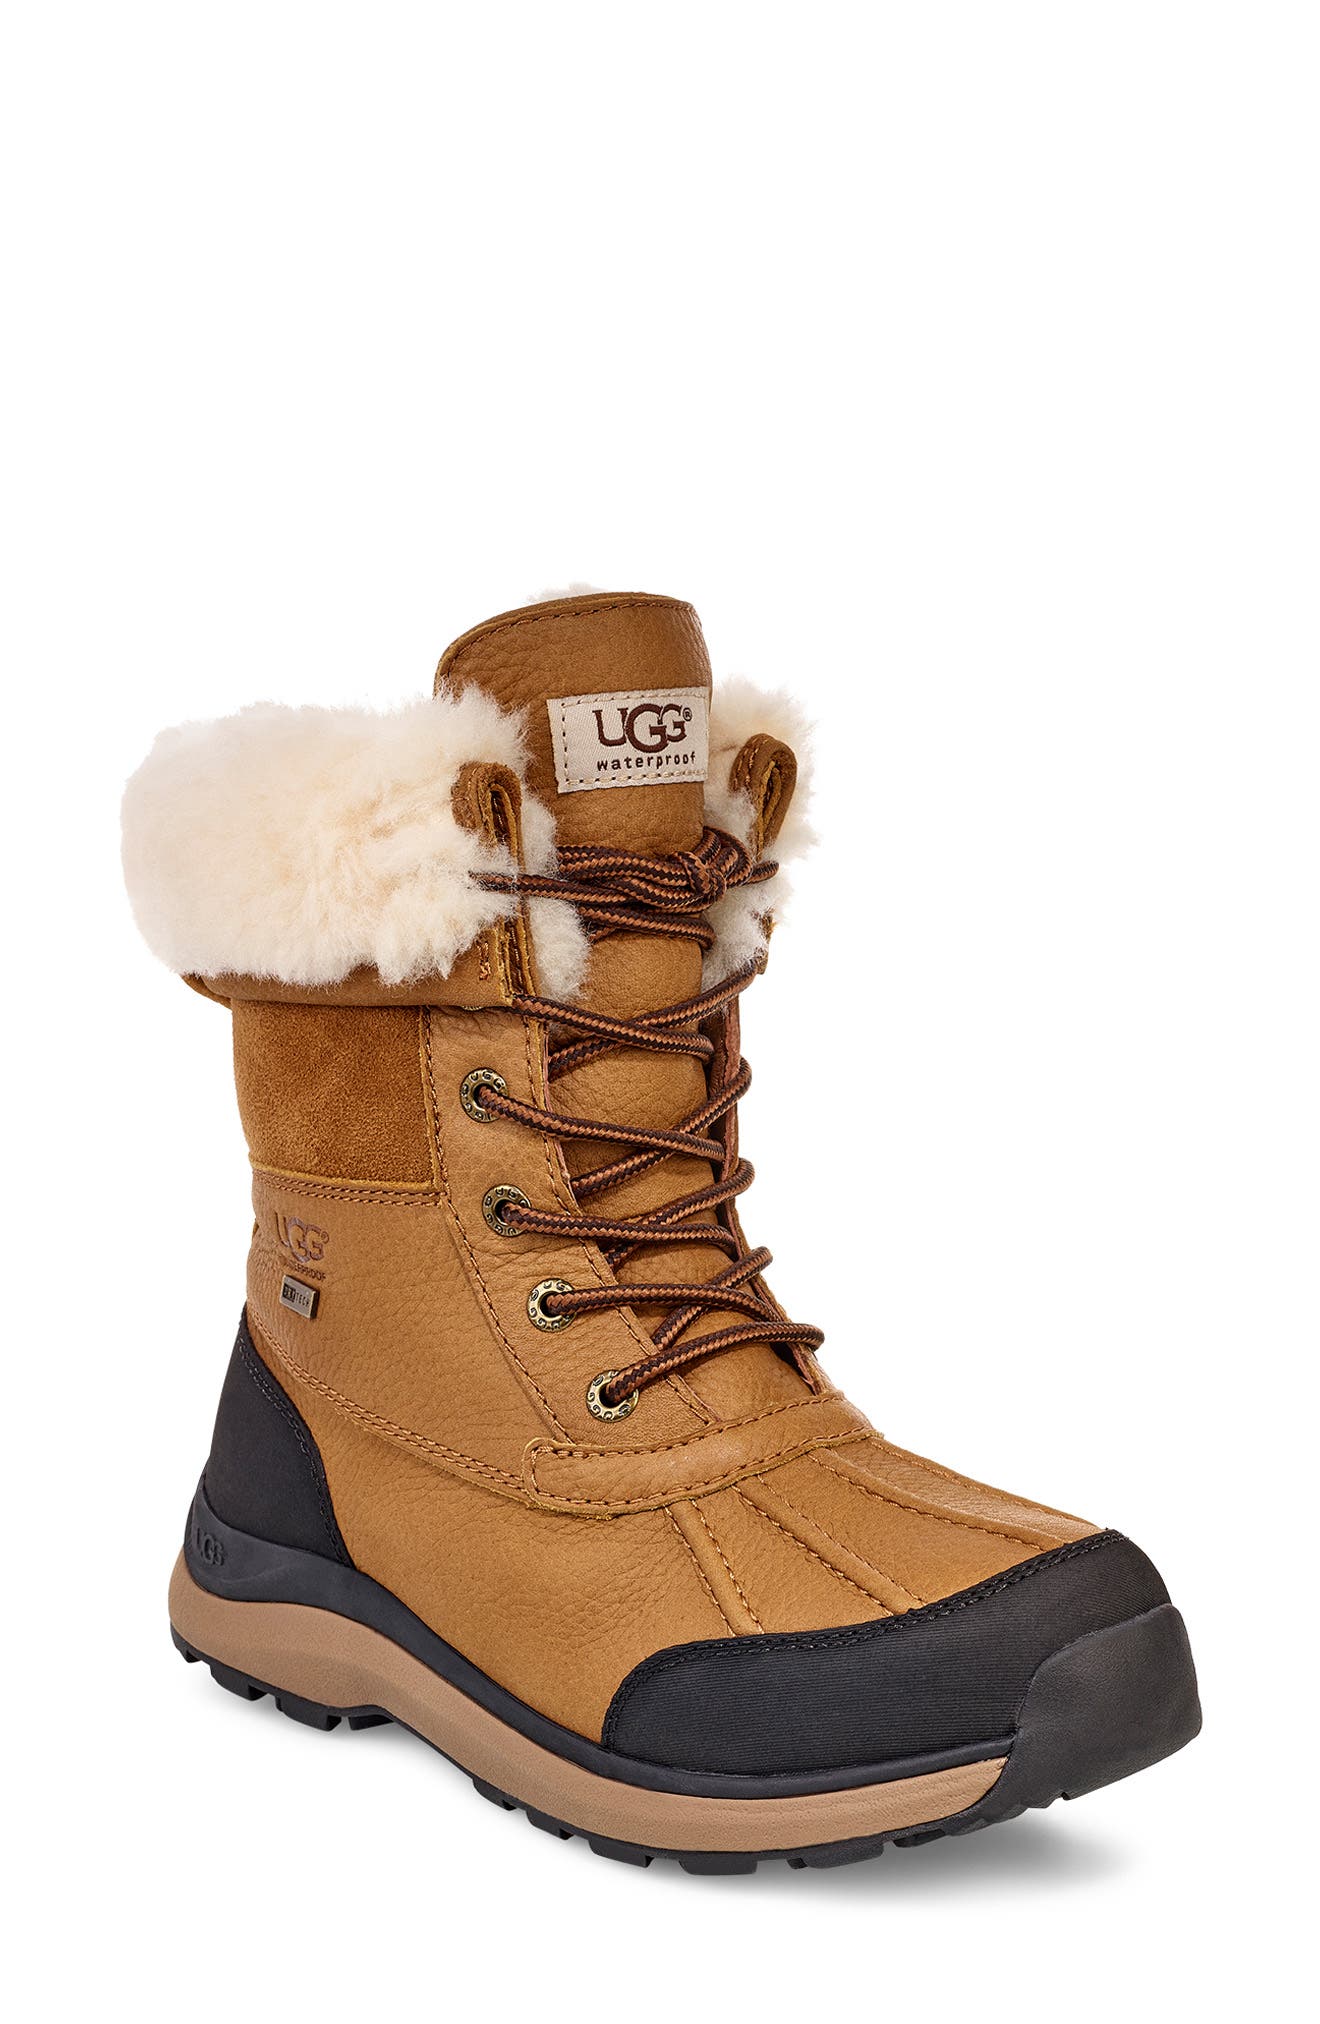 navy ugg boots sale